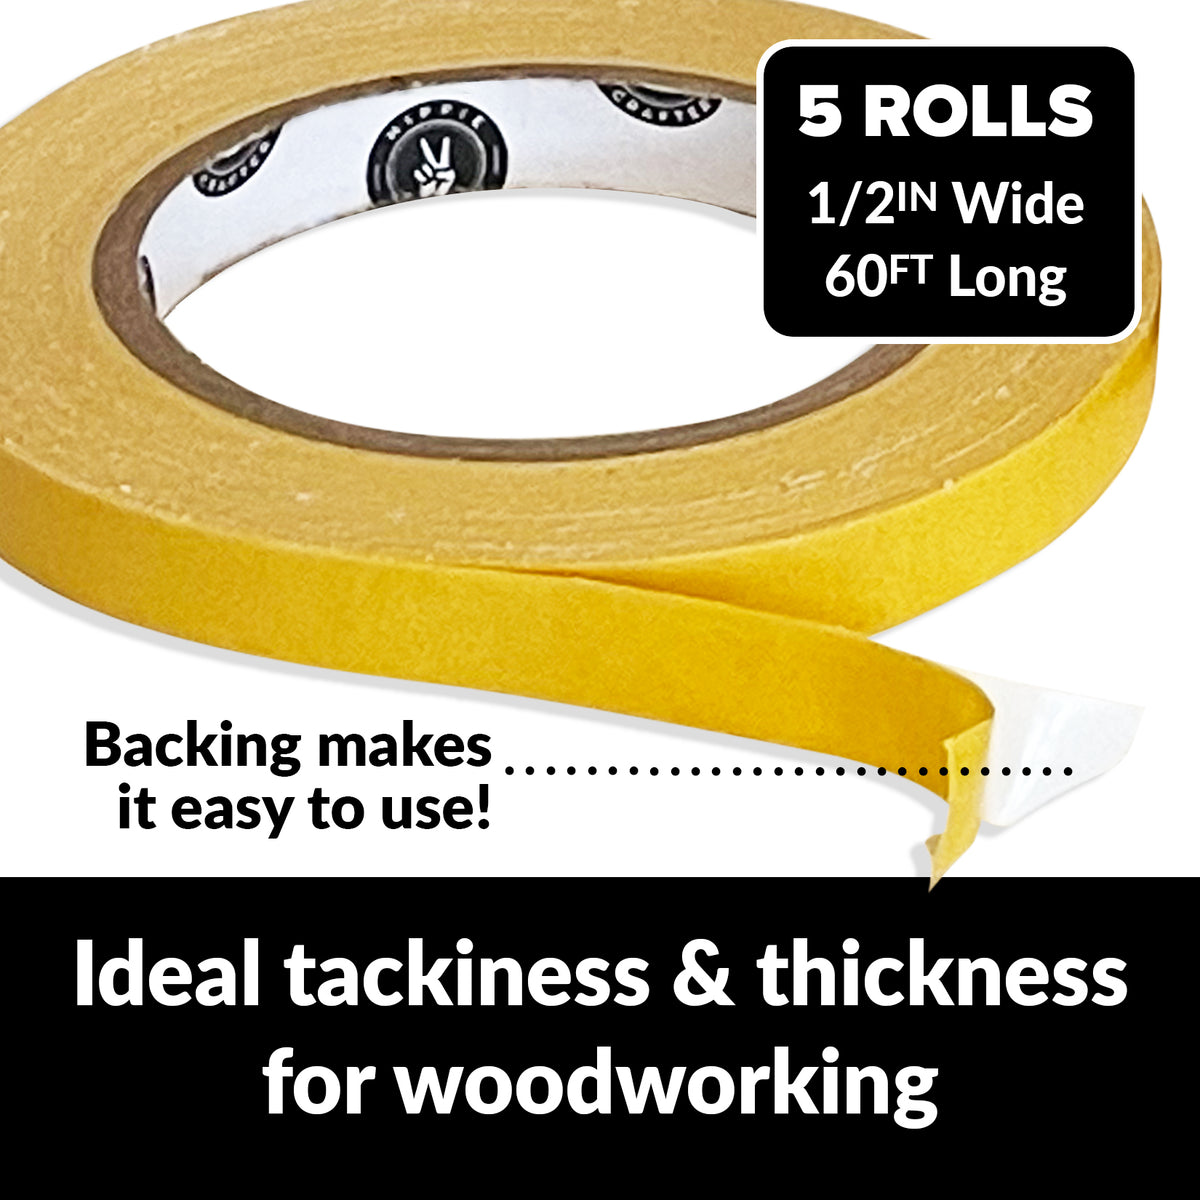 Atack Double-Sided Woodworking Crafter’s Tape, 2.5-inch by 30-Yards Traceless Yellow Backed Woodworking Tape | High Torque CNC Machine Tape for